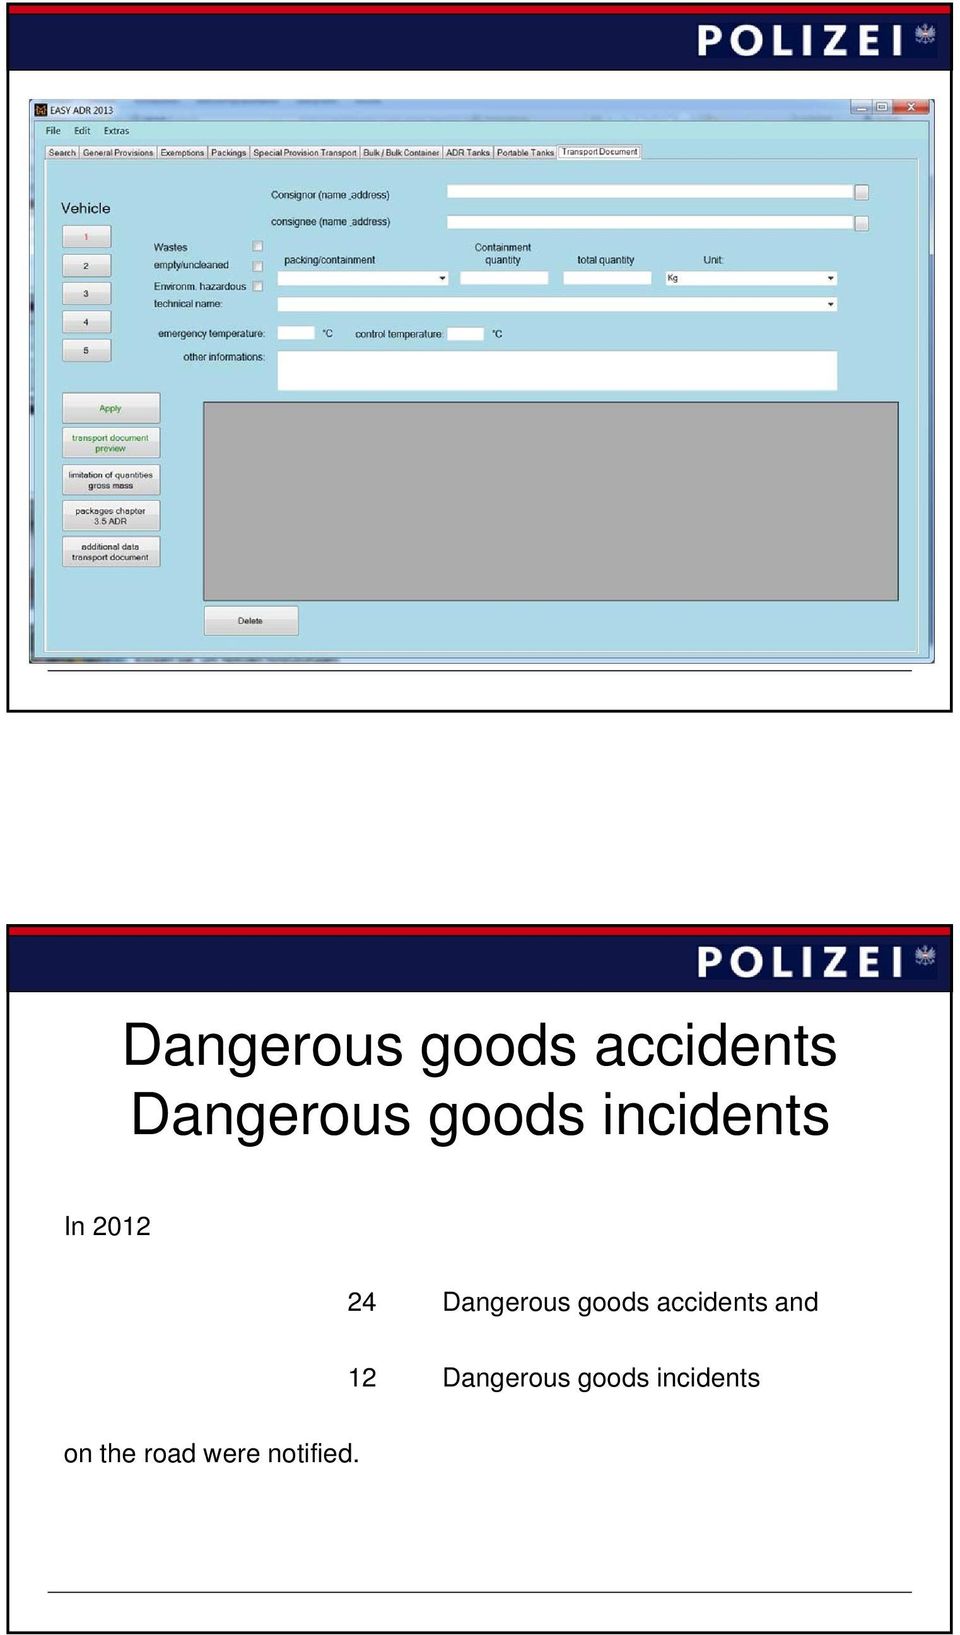 goods accidents and 12 Dangerous